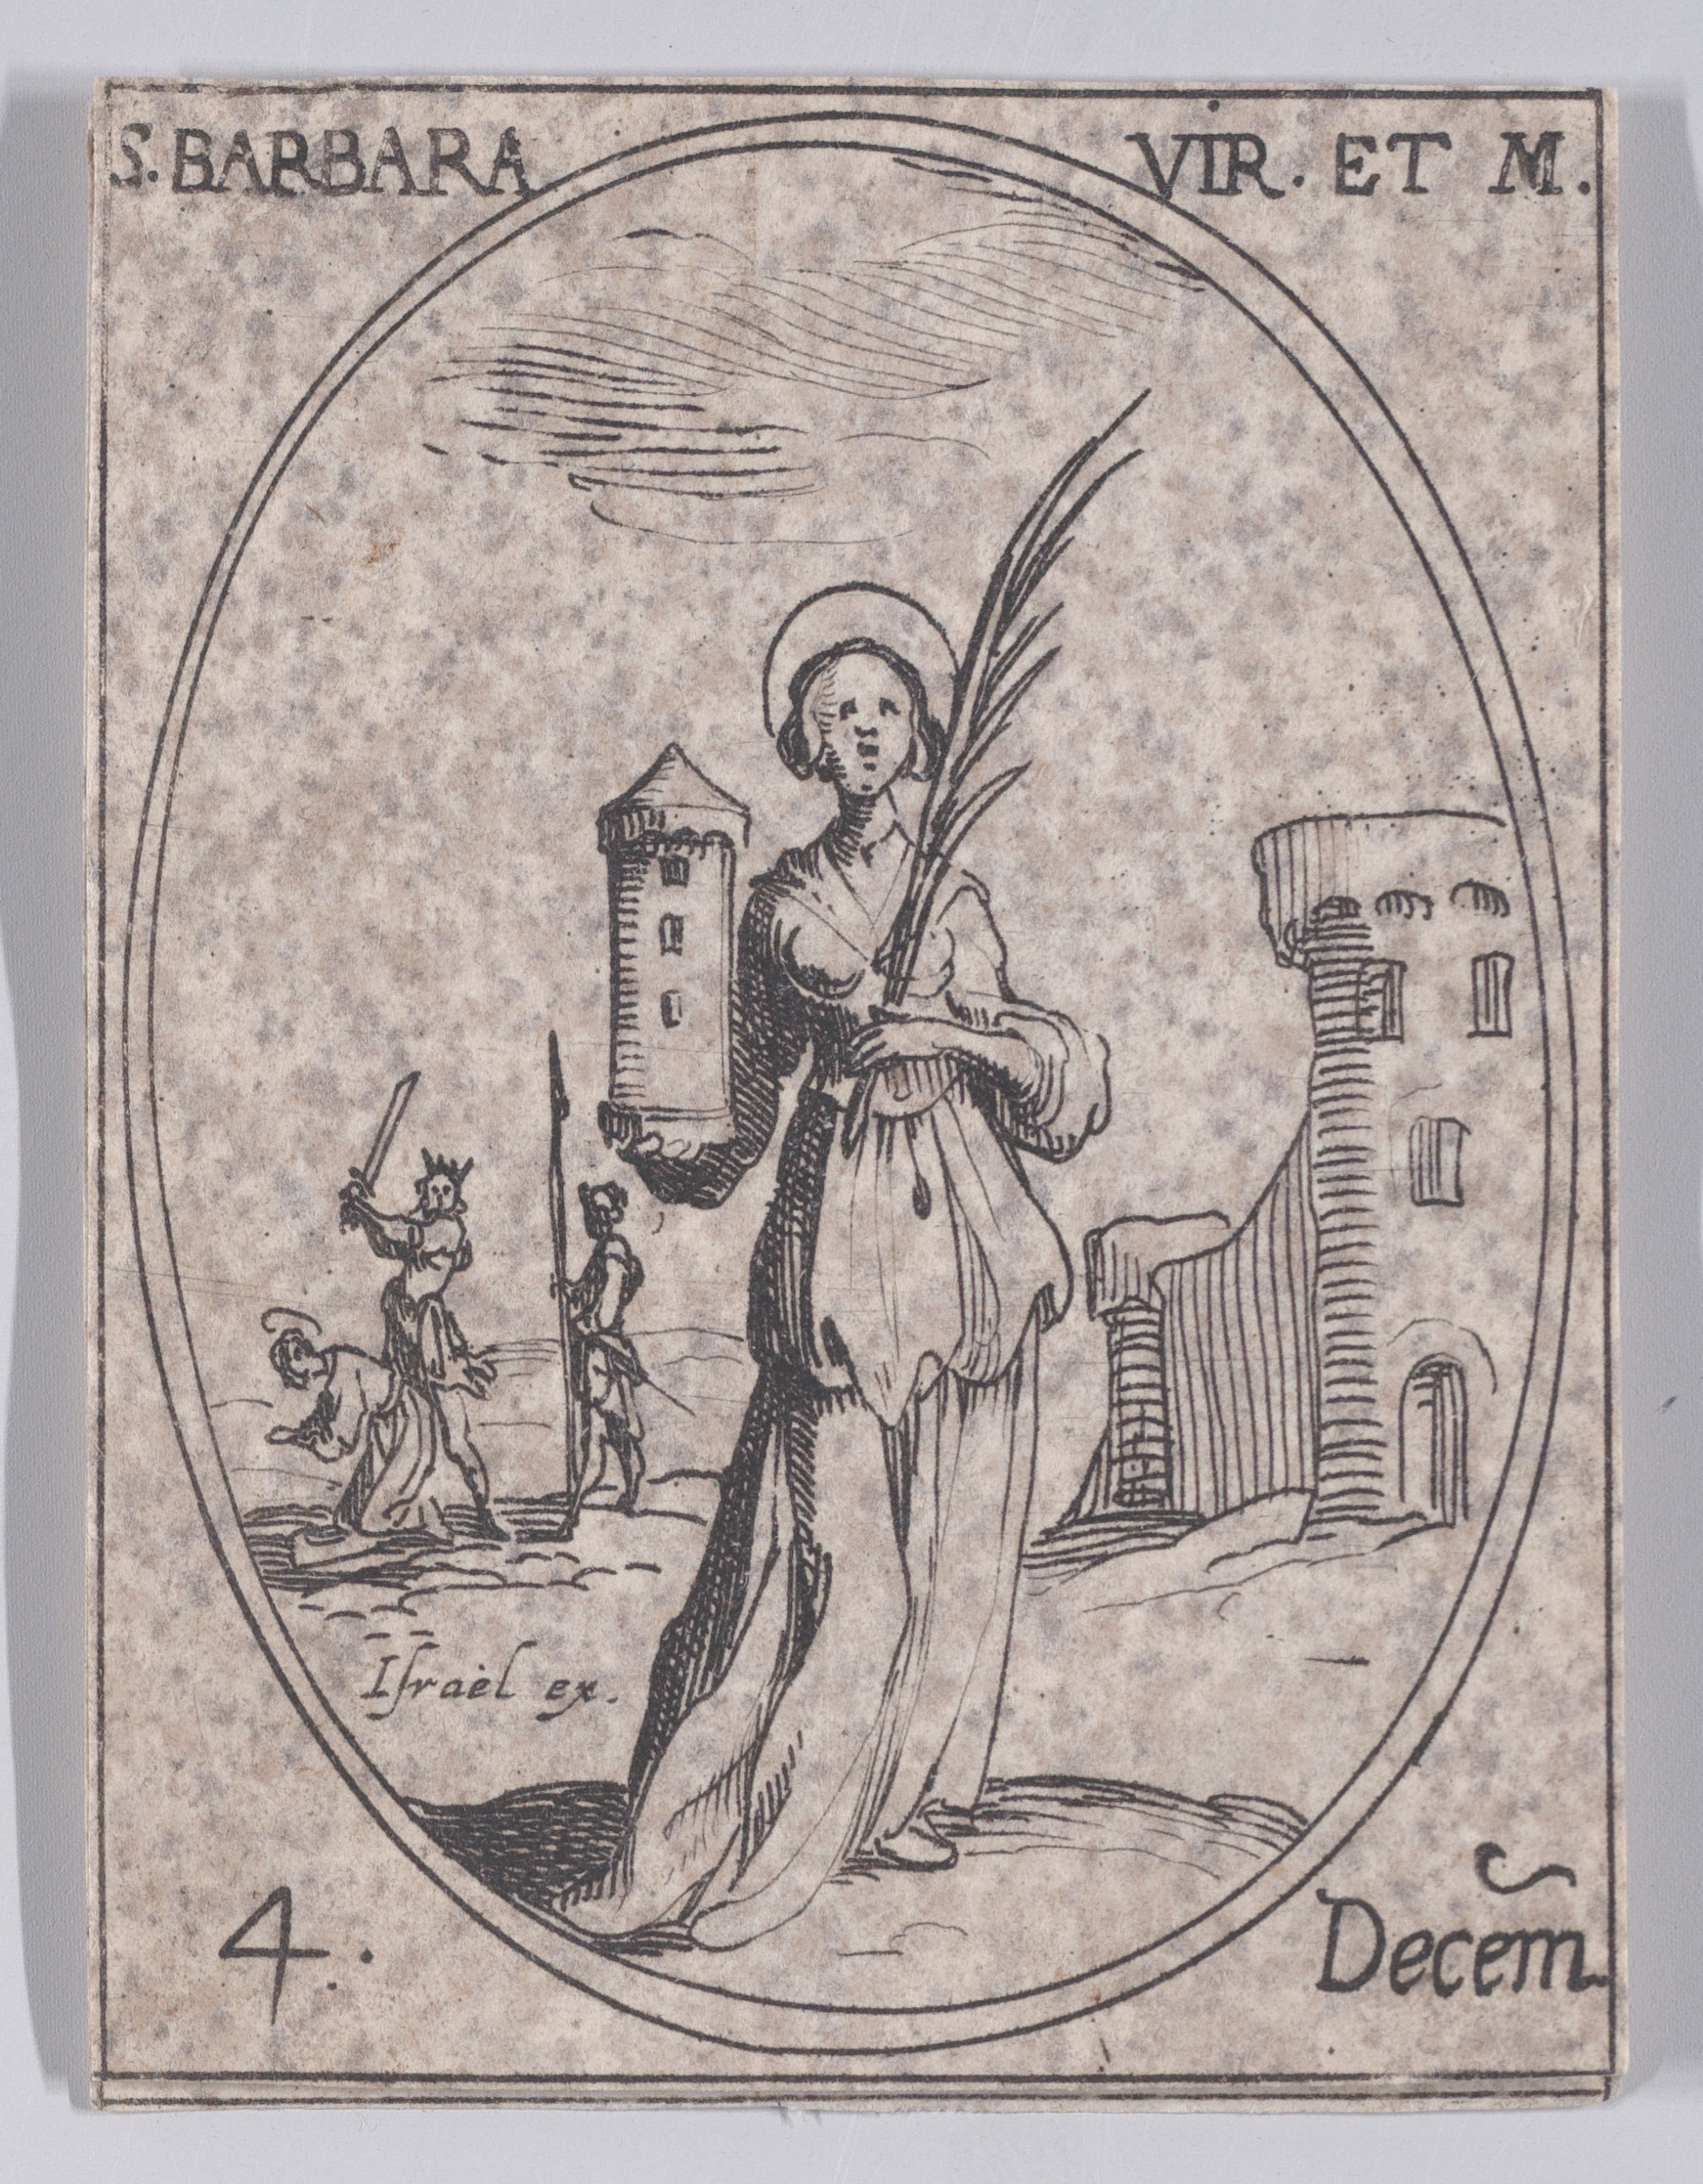 S. Barbe, vierge et martyre (St. Barbara, Virgin and Martyr), December 4th, from Les Images De Tous Les Saincts et Saintes de L'Année (Images of All of the Saints and Religious Events of the Year), Jacques Callot (French, Nancy 1592–1635 Nancy), Etching; second state of two (Lieure)